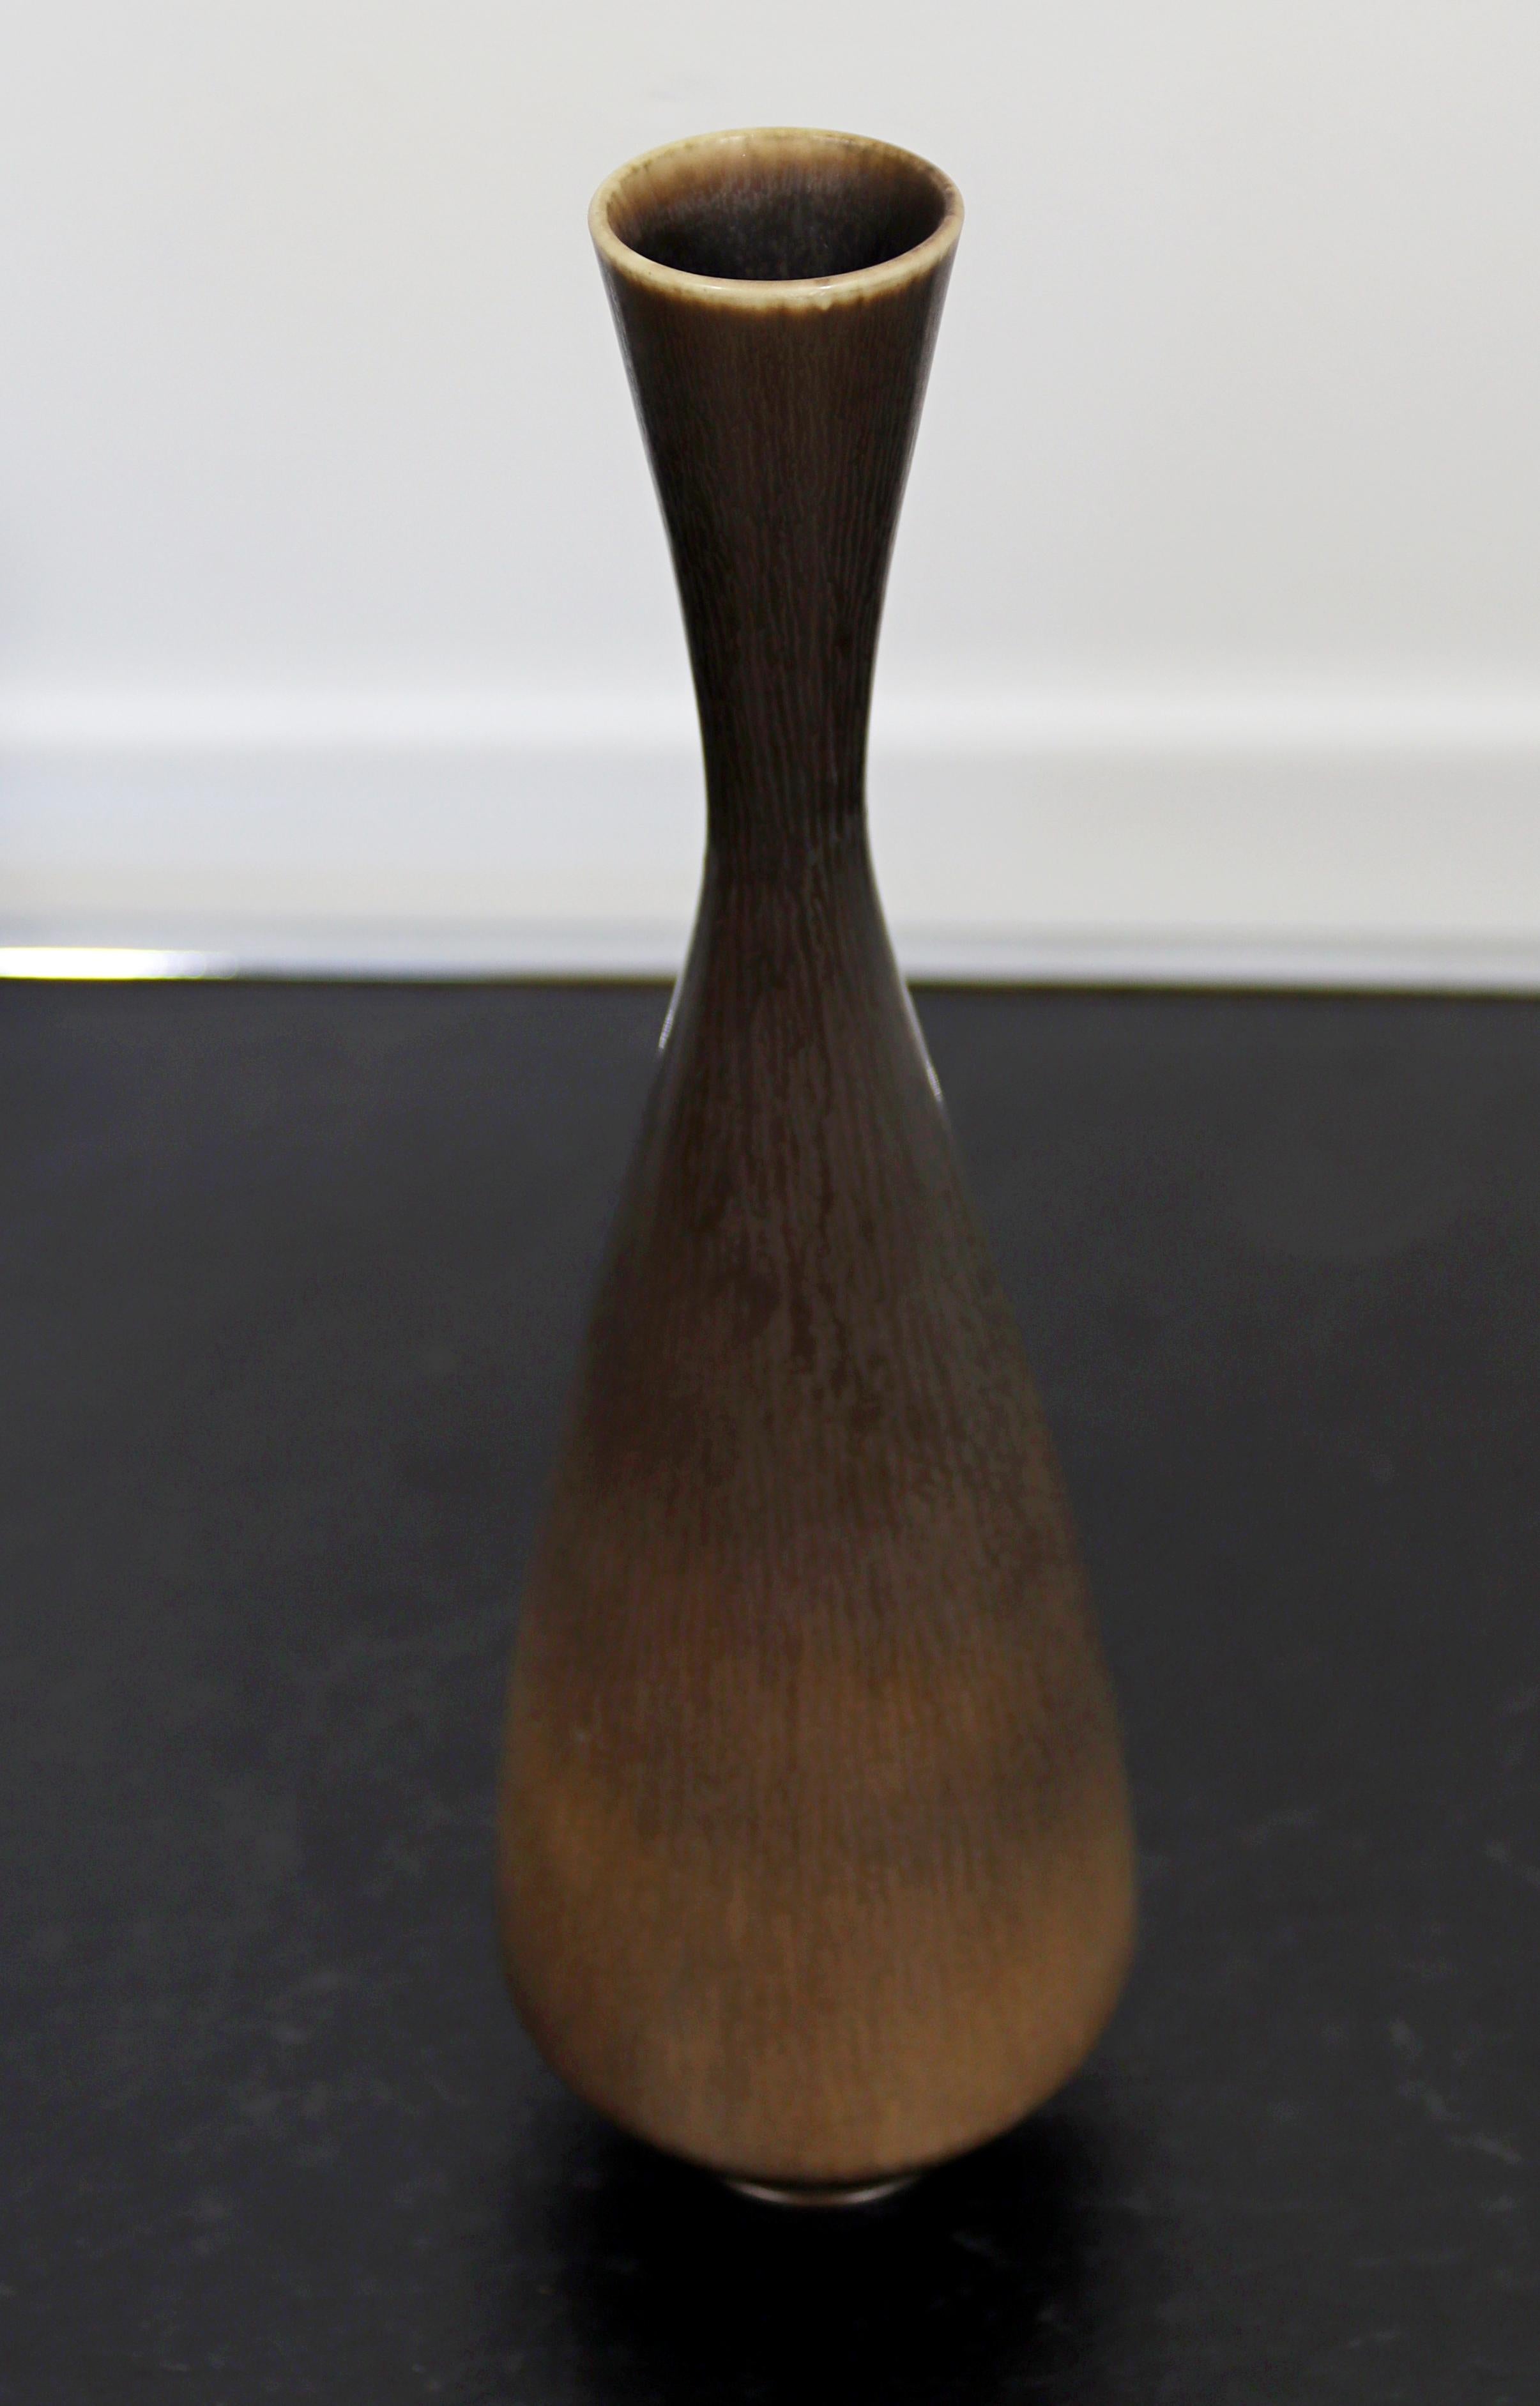 For your consideration is a stunning, slim, ceramic vase, with a gray hare's fur glaze, made in Sweden, signed on the base by Berndt Friberg, circa the 1960s. In excellent condition. The dimensions are 3